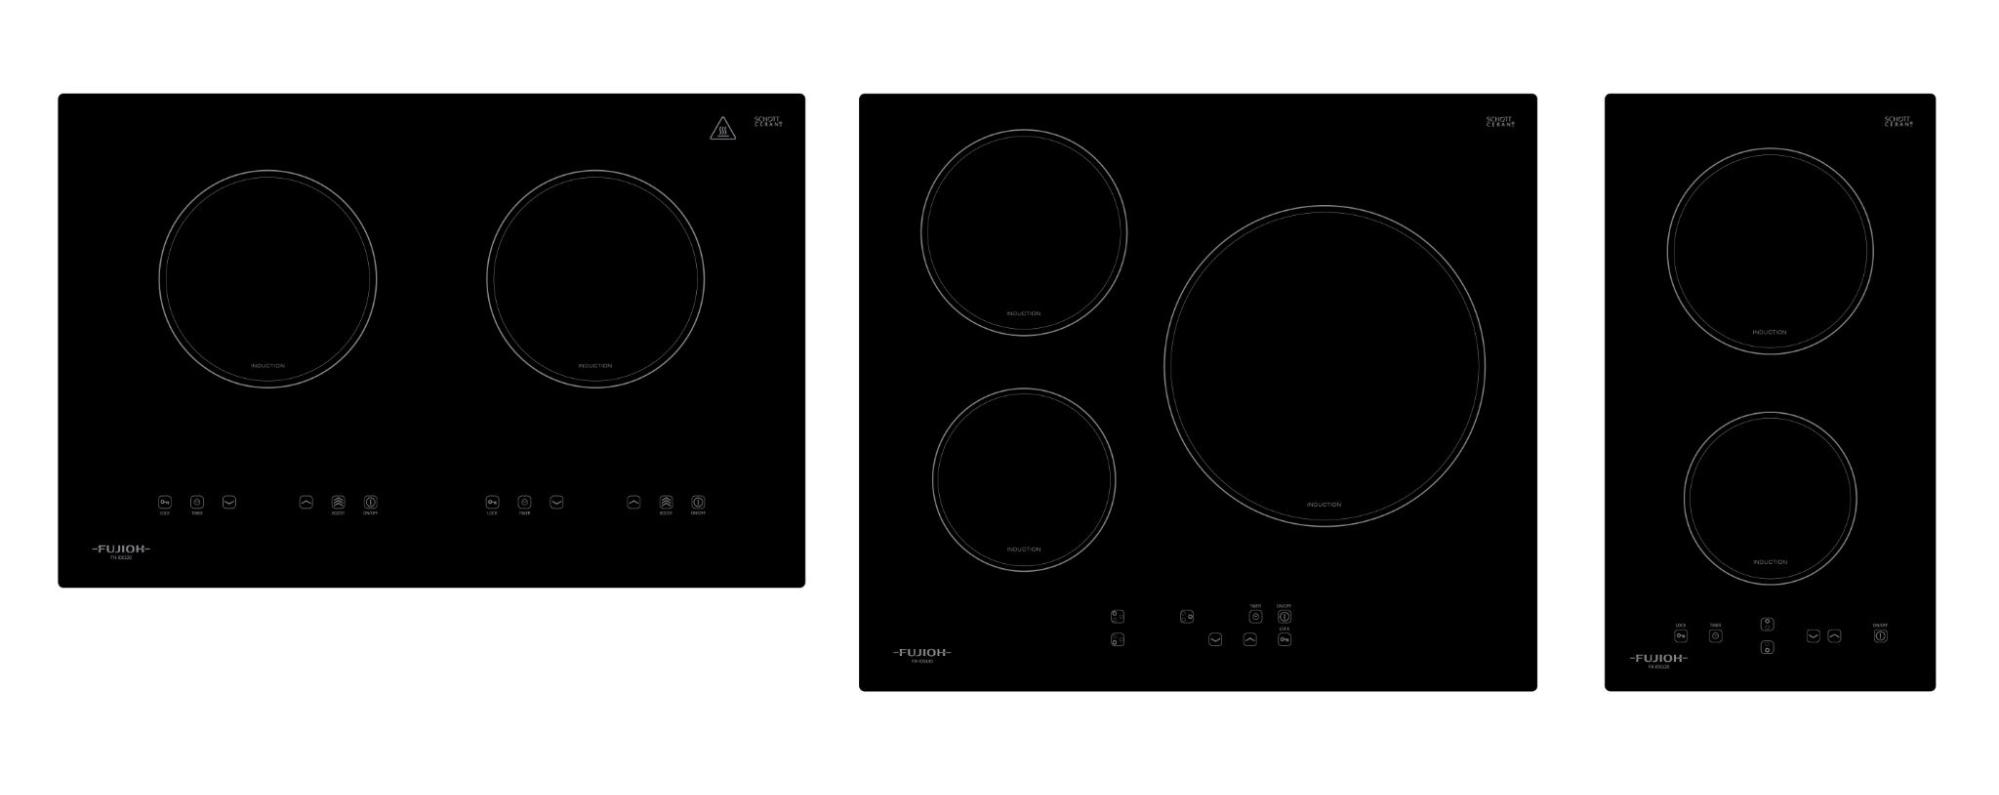 5 Every Induction Hob User in Singapore Should Know